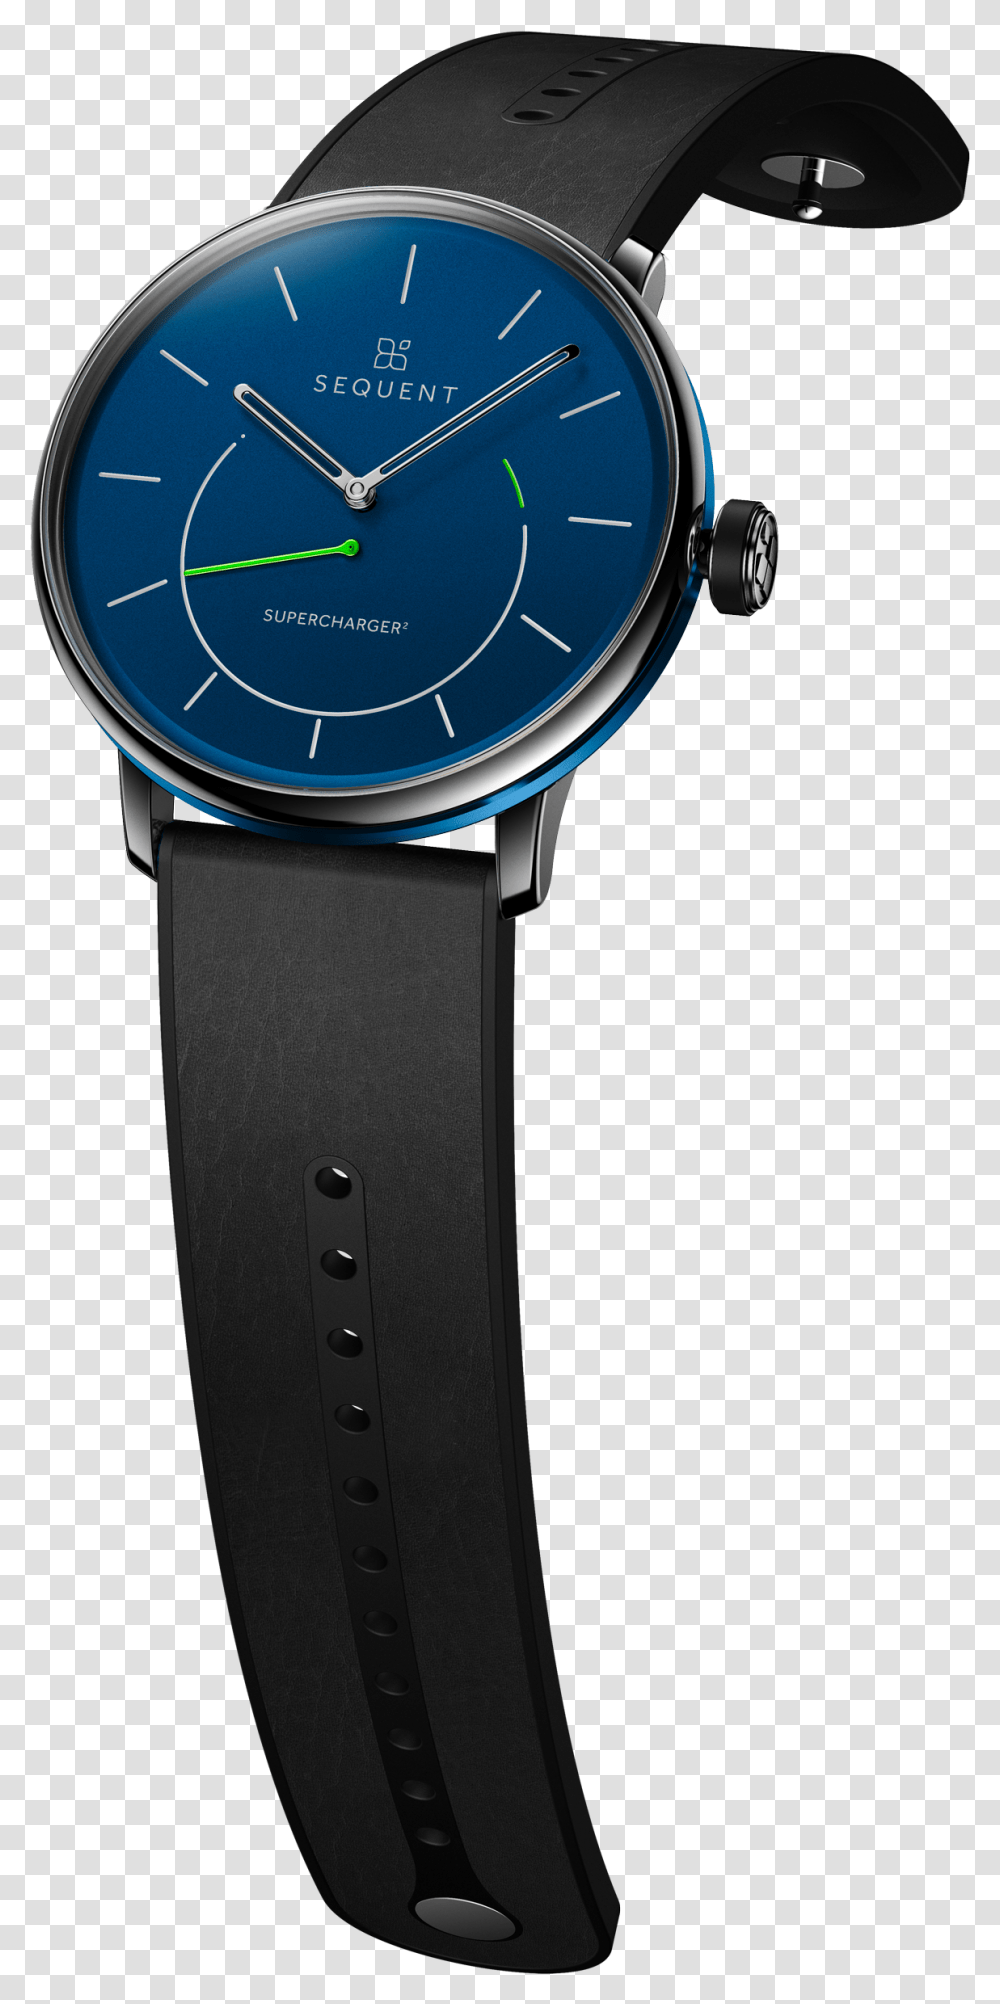 Sequent Supercharger2 Smartwatch Gets Powered By Human, Wristwatch, Clock Tower, Architecture, Building Transparent Png